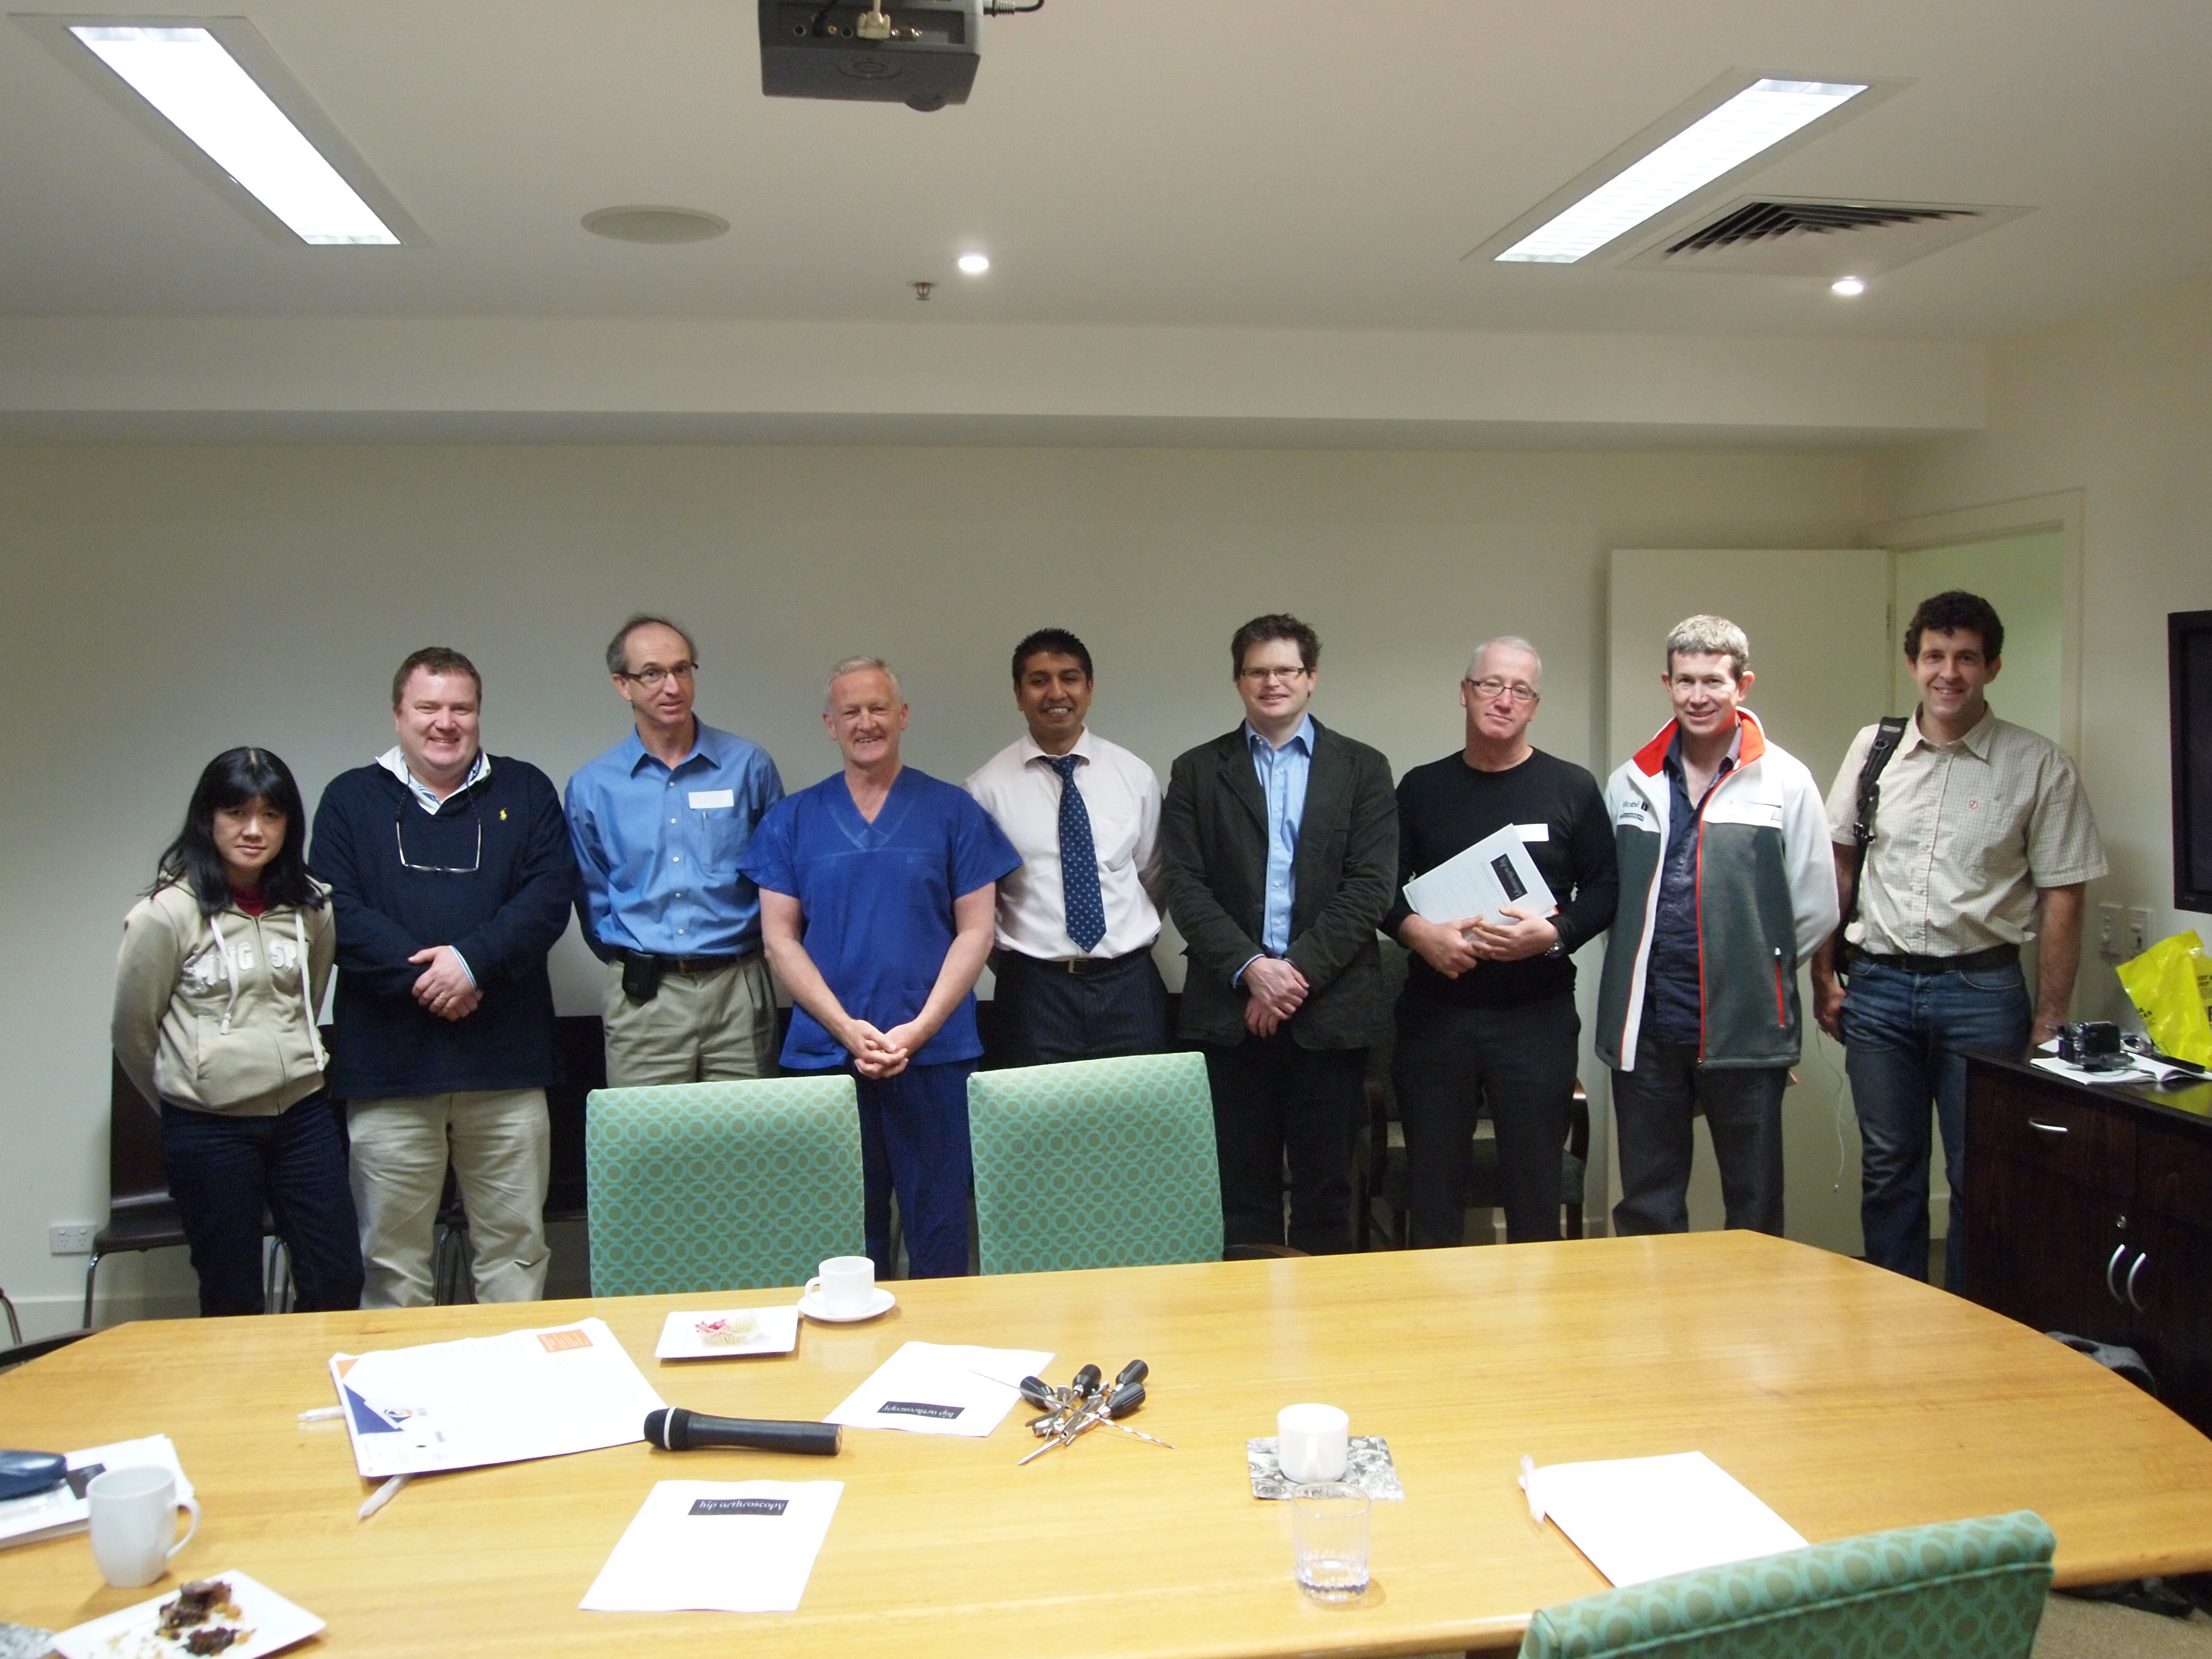 John, Parm, and Mike teaching Melbourne Surgeons on the 3rd HAA Hip Arthroscopy Instructional Course in 2009.